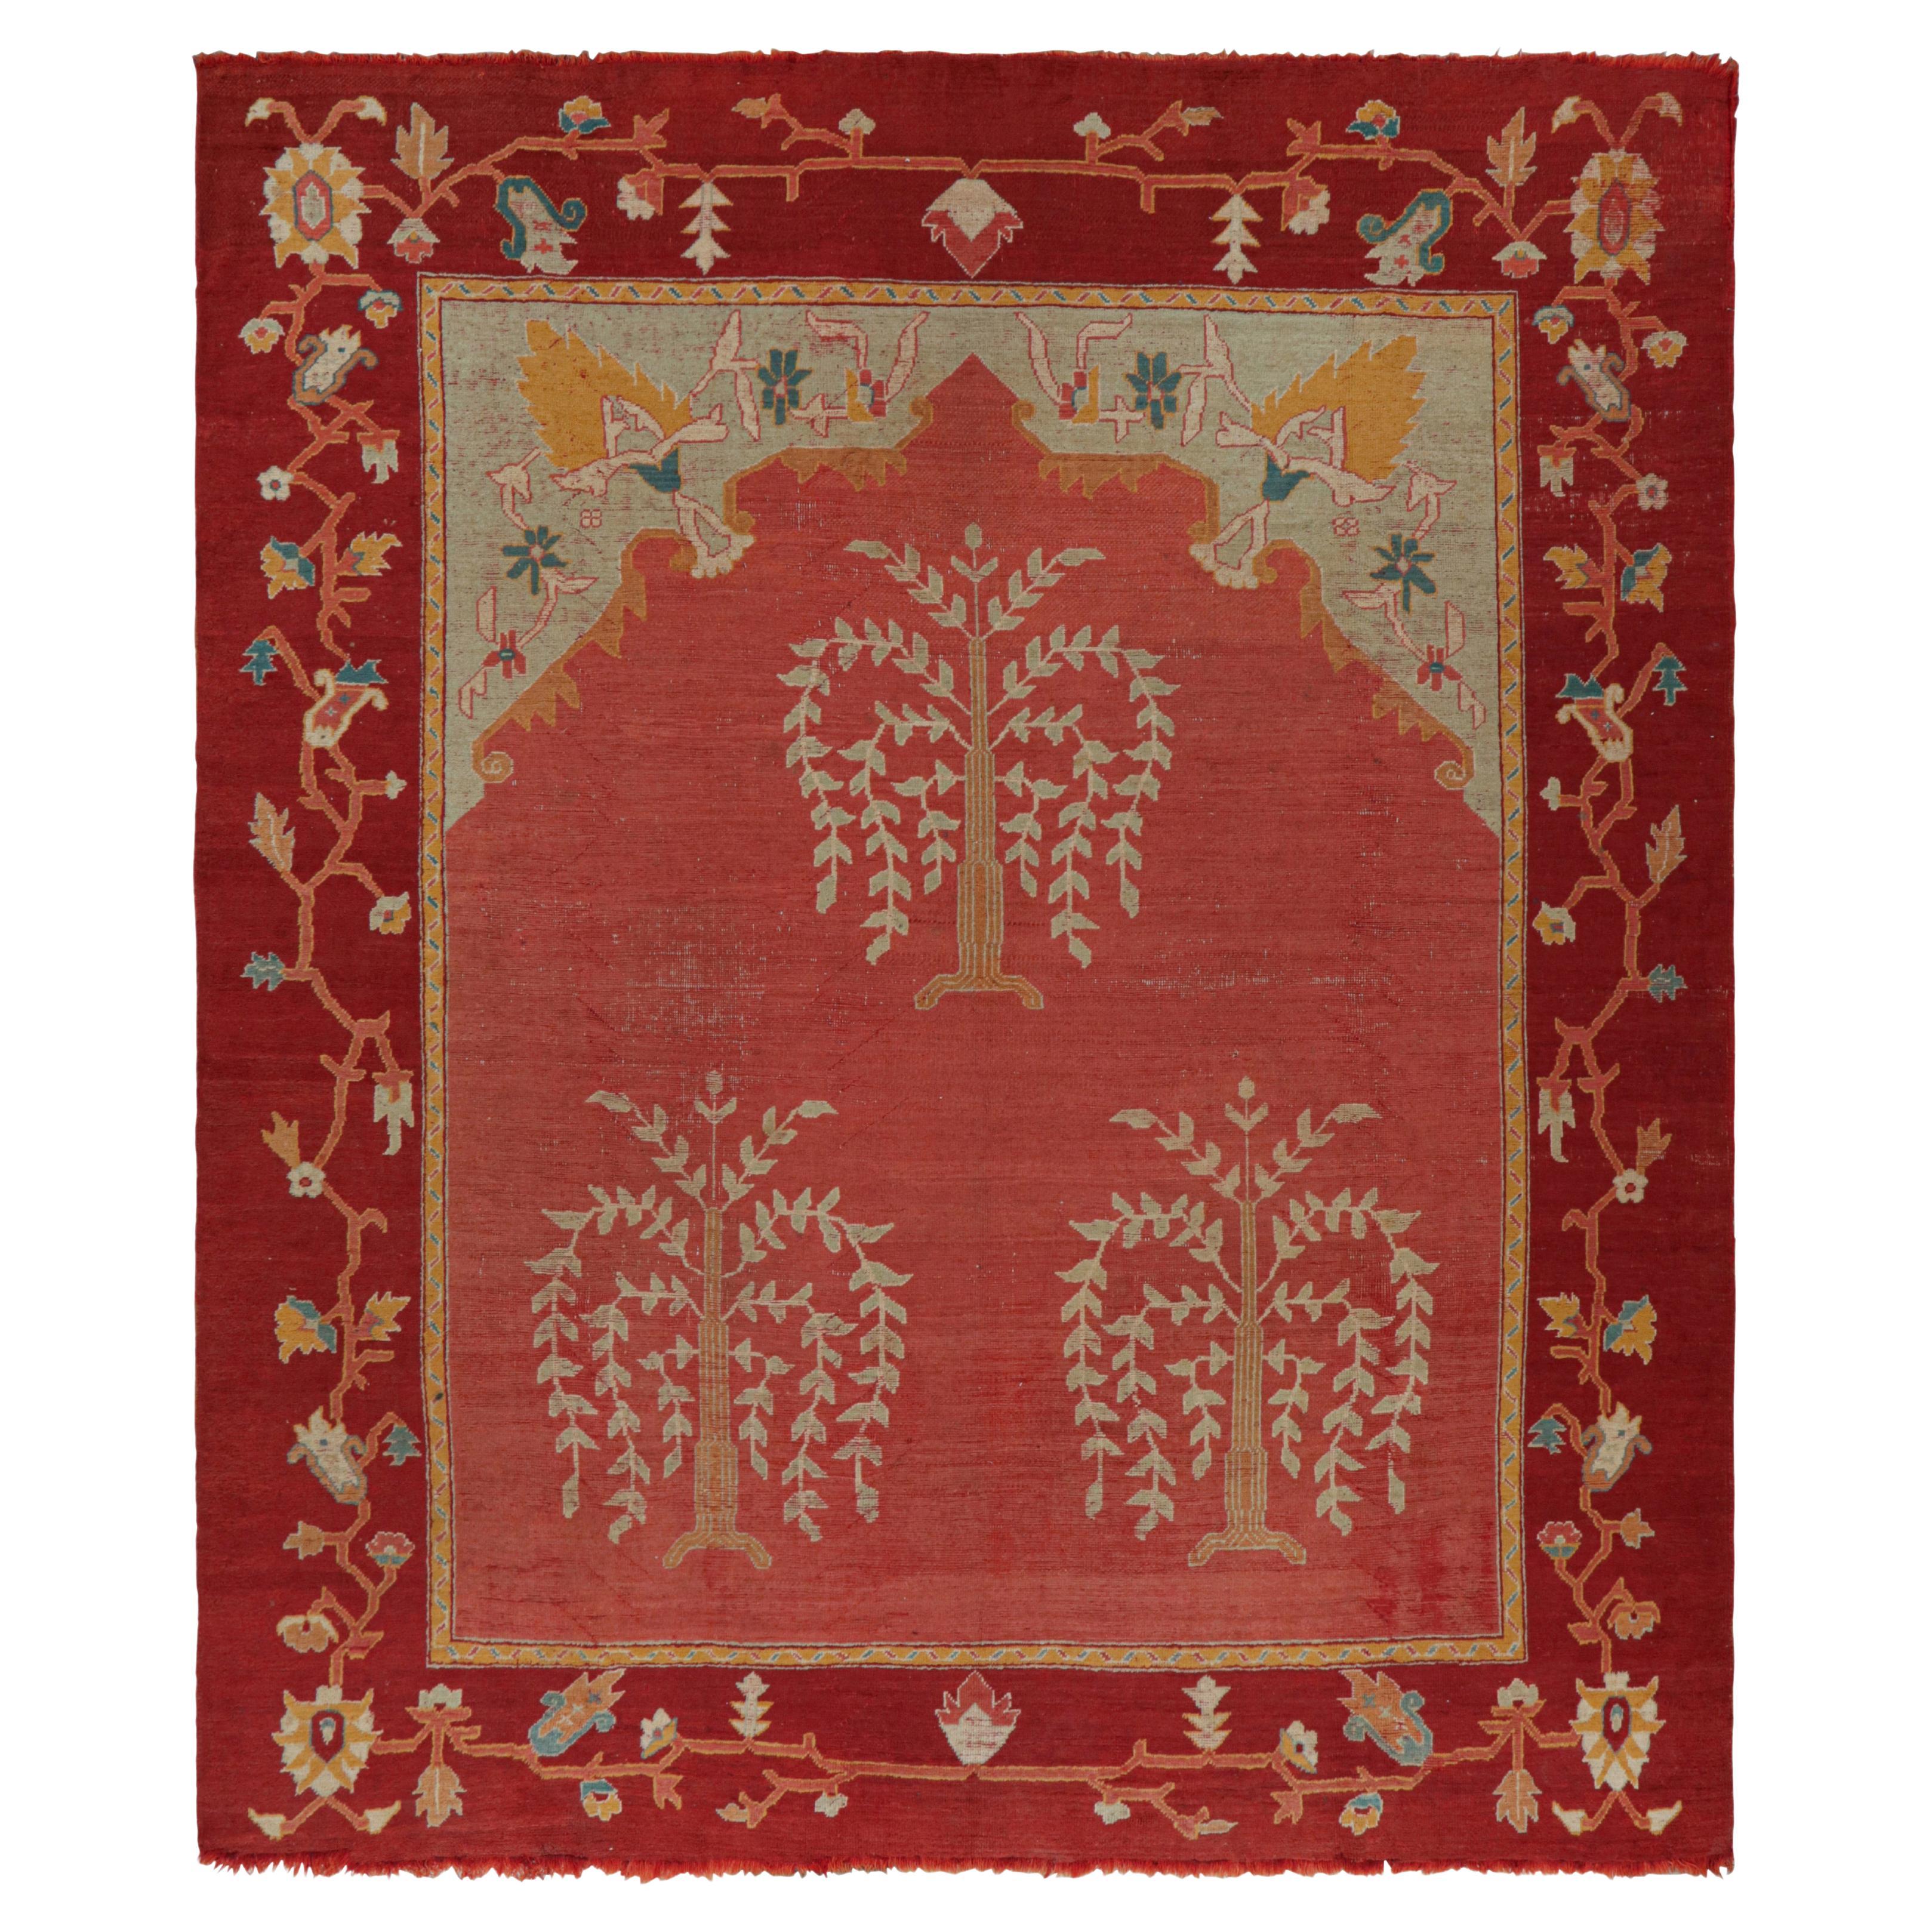 Antique Oushak Rug in Red with Floral Medallions, from Rug & Kilim